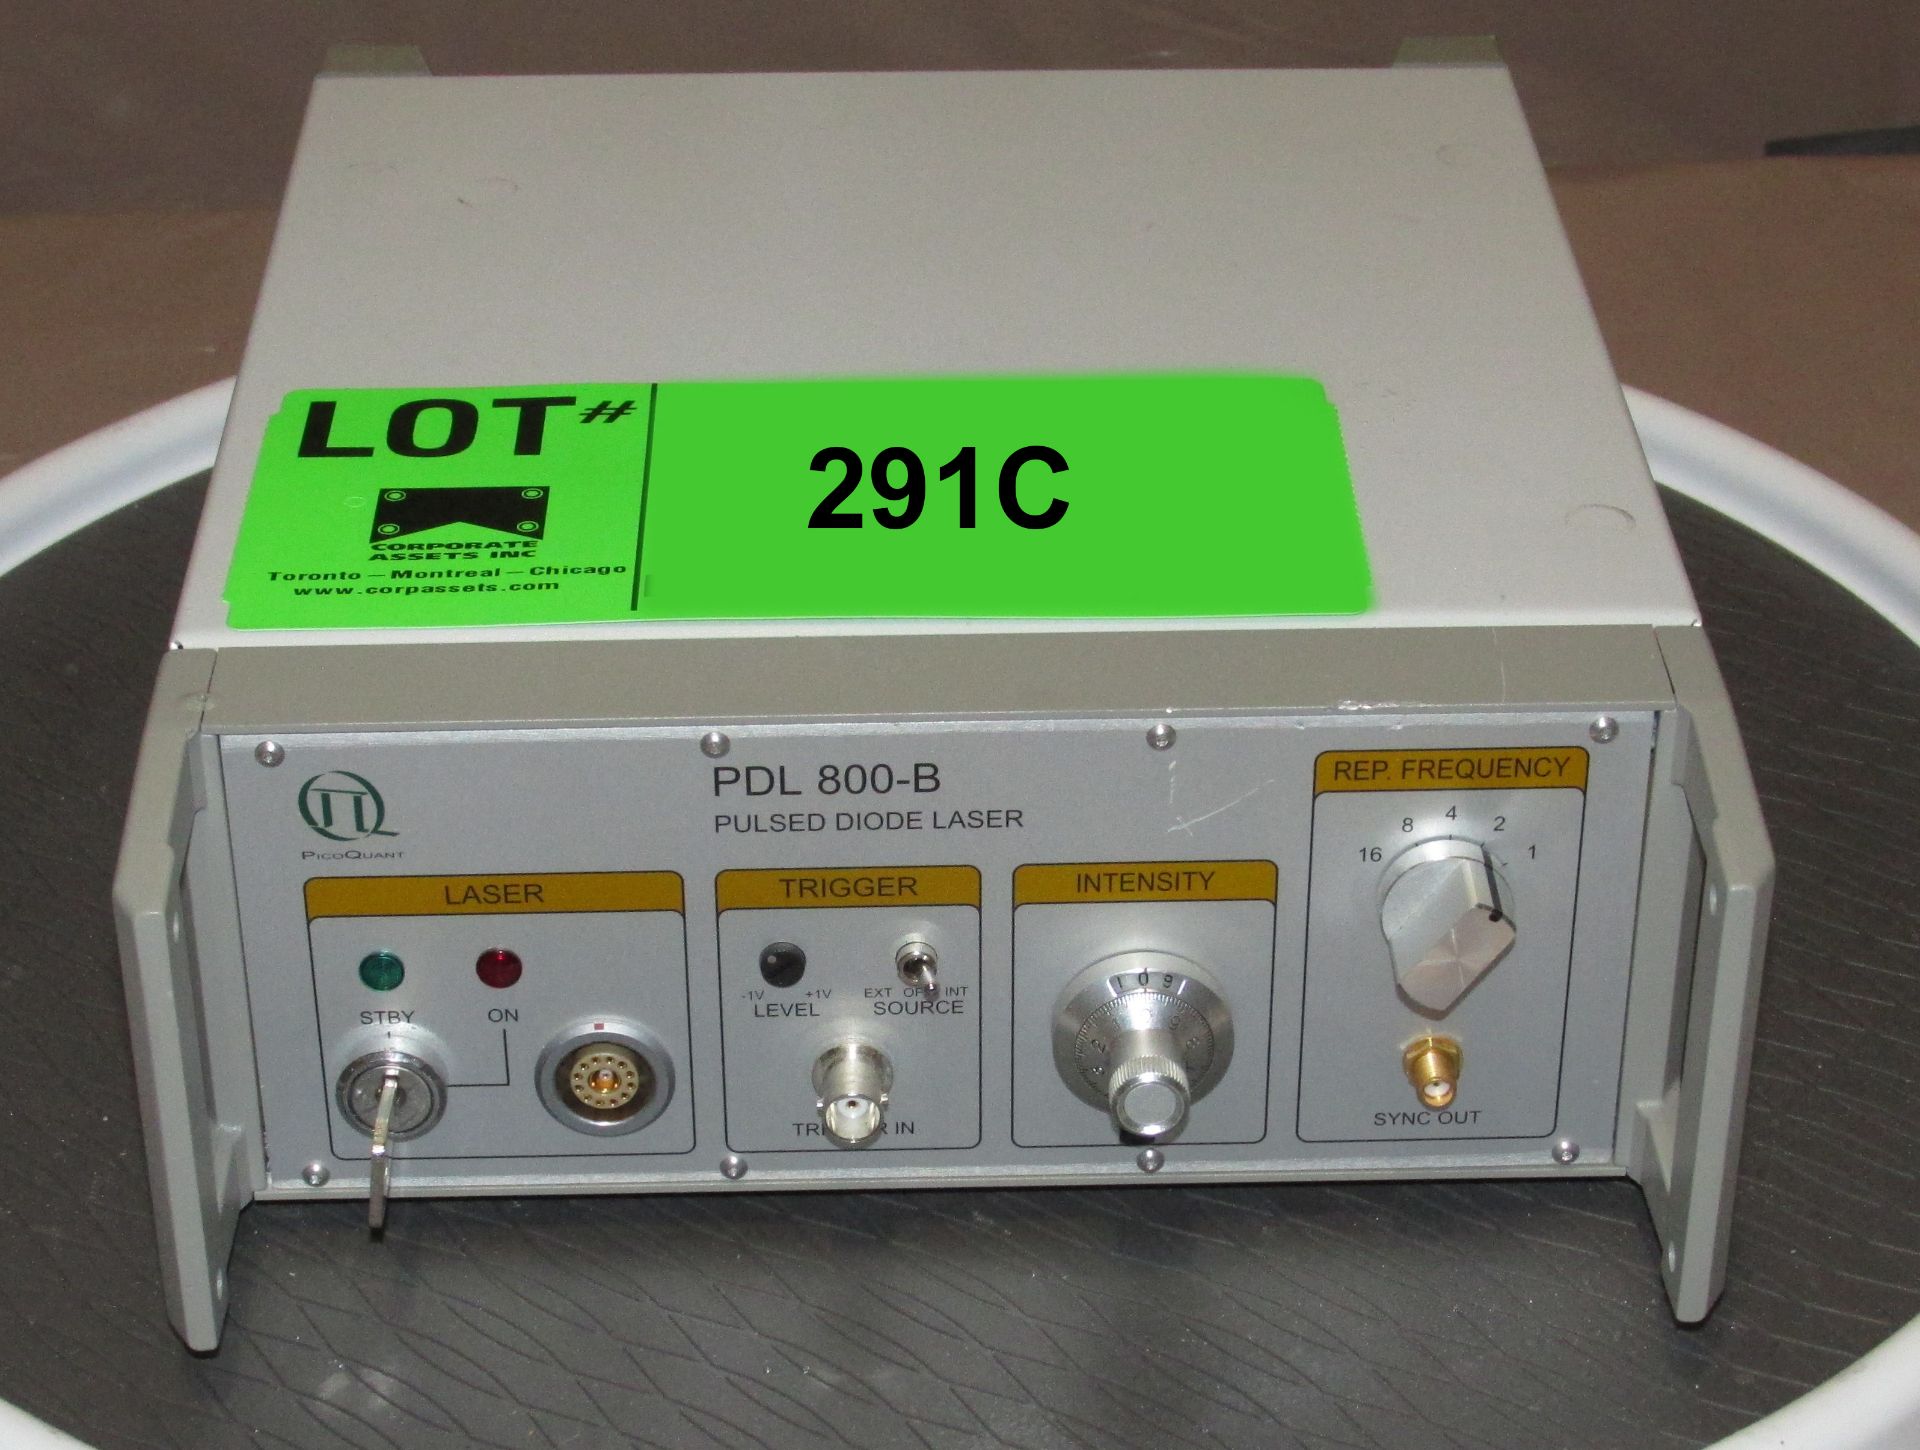 PICO-QUANT PDL-800-B PULSE DIODE LASER S/N: P-40-43300/03 (LOCATED IN TORONTO, ON)